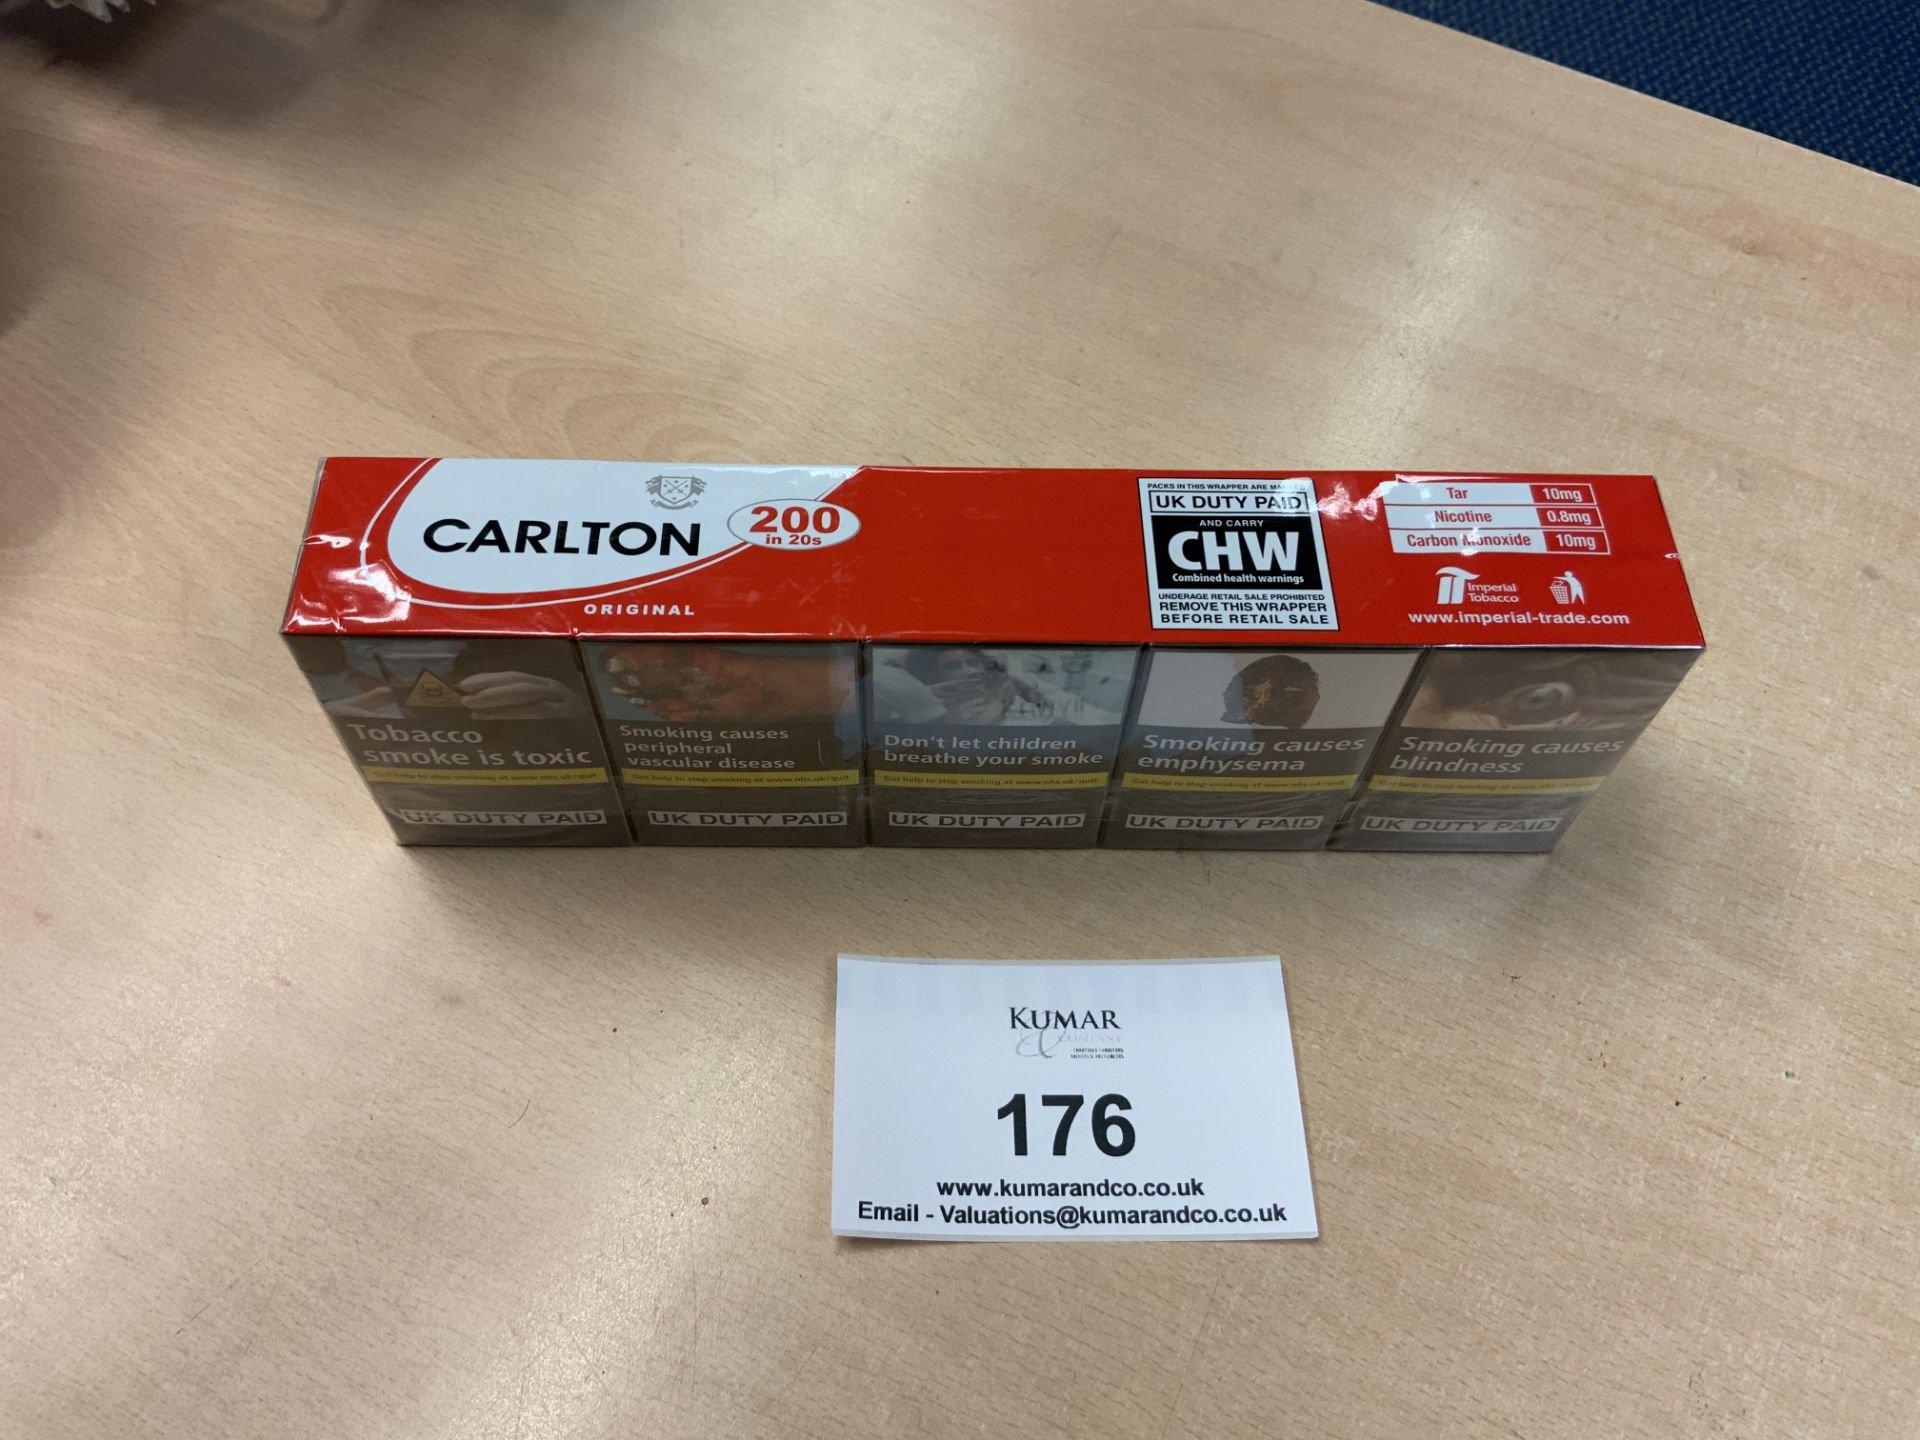 1: Outer 10 x 20 Carlton Original King Size Unopened Cigarettes - Image 2 of 3